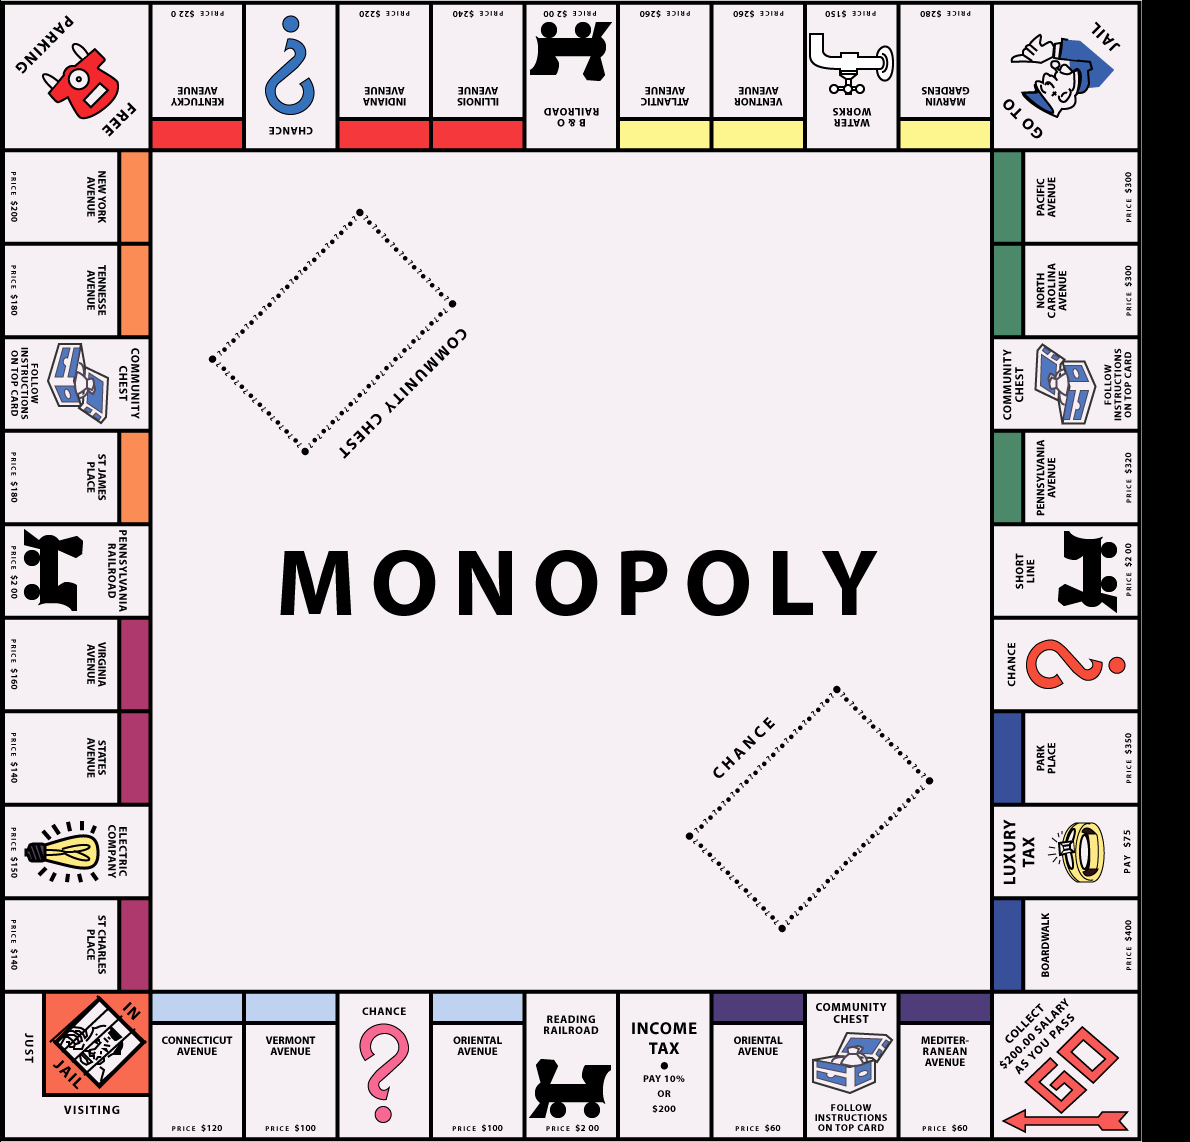 Monopoly Game Board Layout Awesome Standard Uk Edition Monopoly Game Board Layout